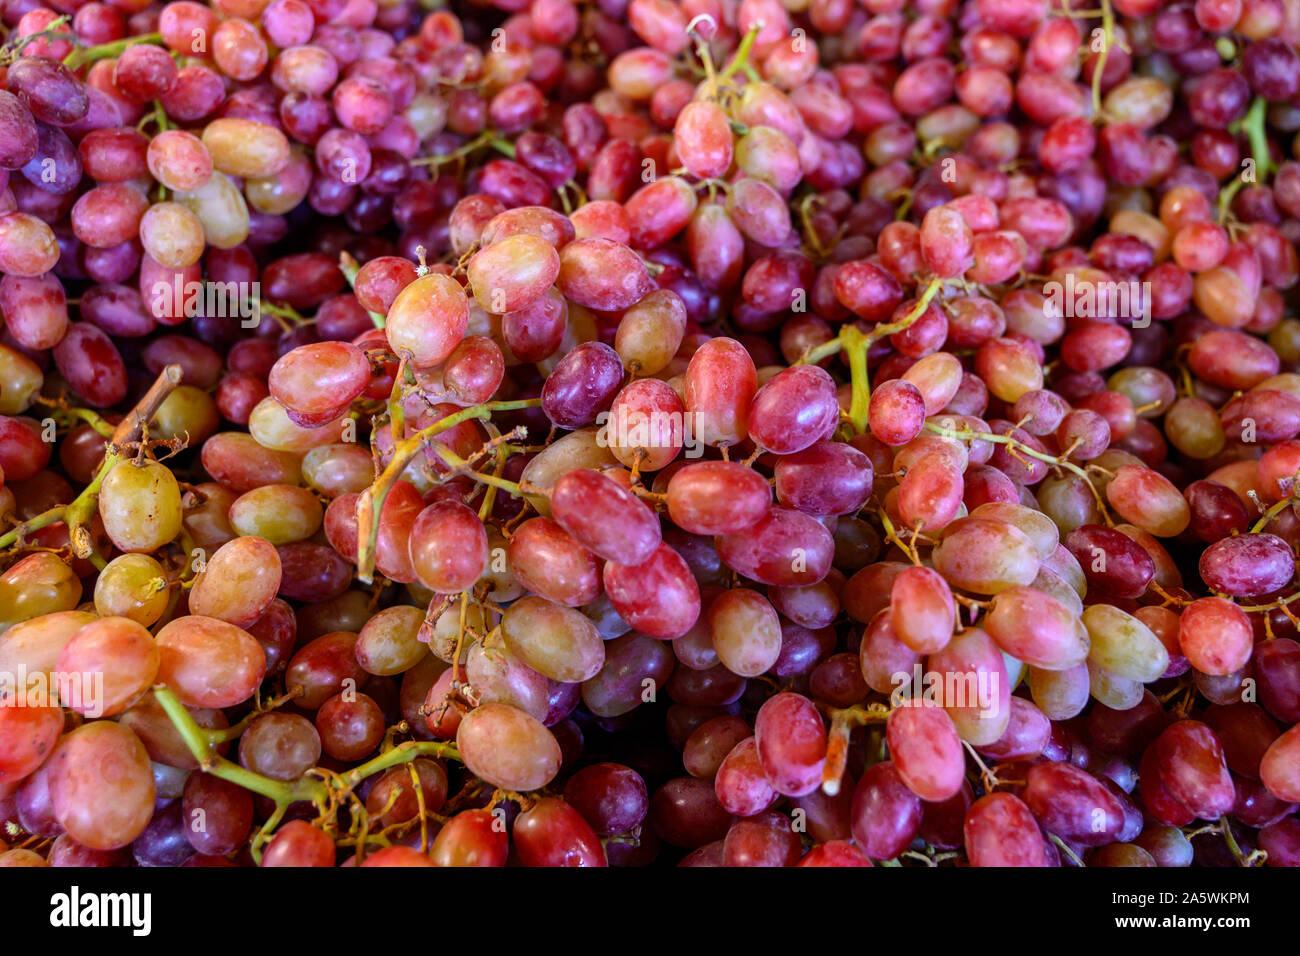 https://c8.alamy.com/comp/2A5WKPM/closeup-of-clusters-of-baby-red-natural-seadless-grapes-2A5WKPM.jpg